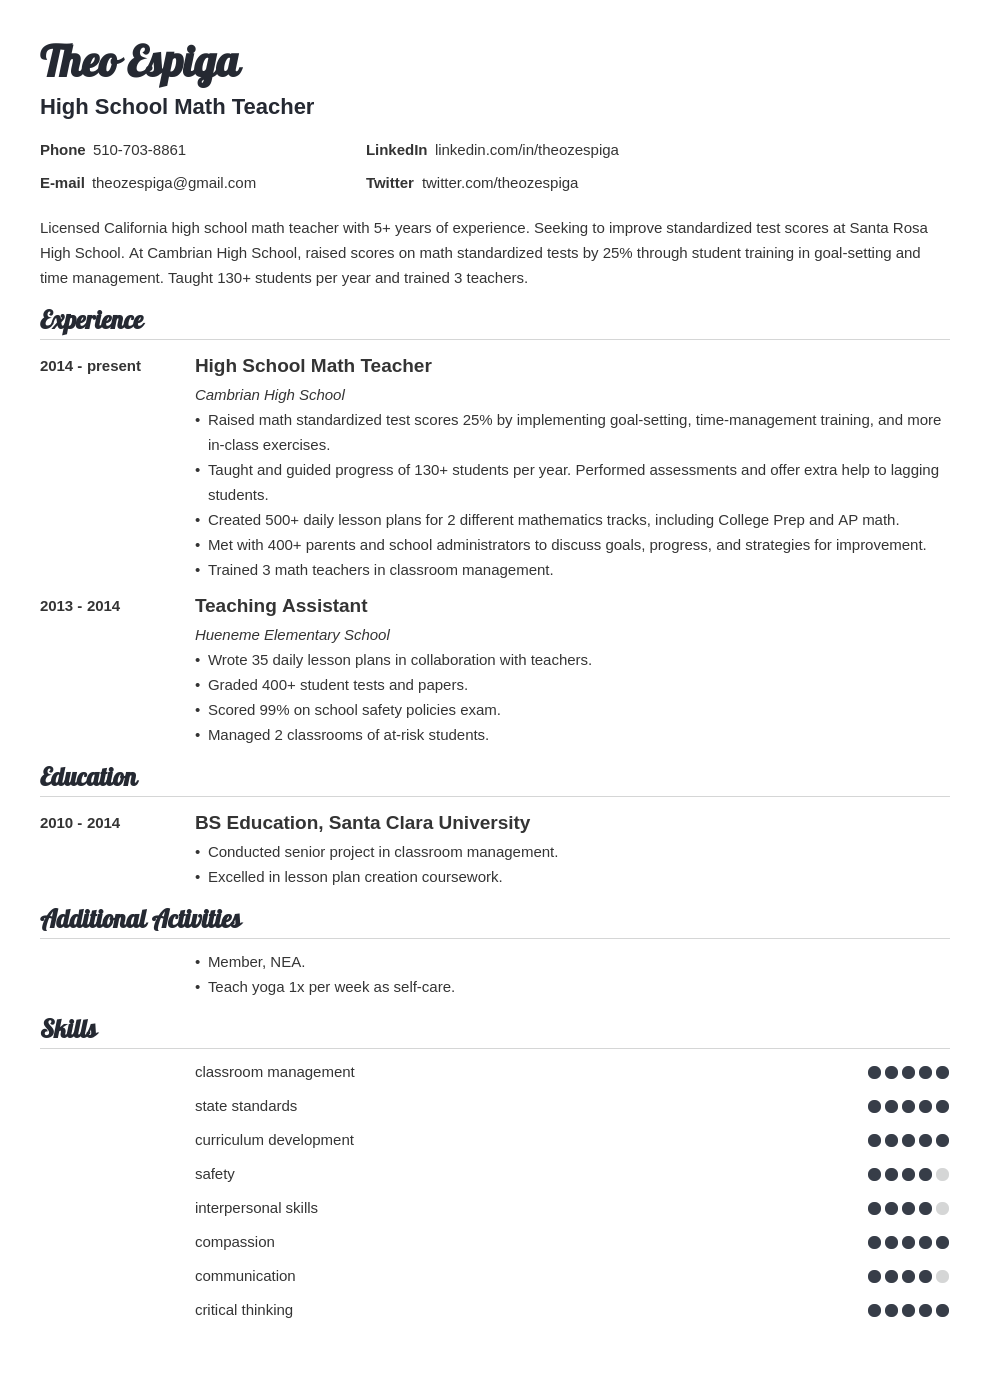 how to write resume education section